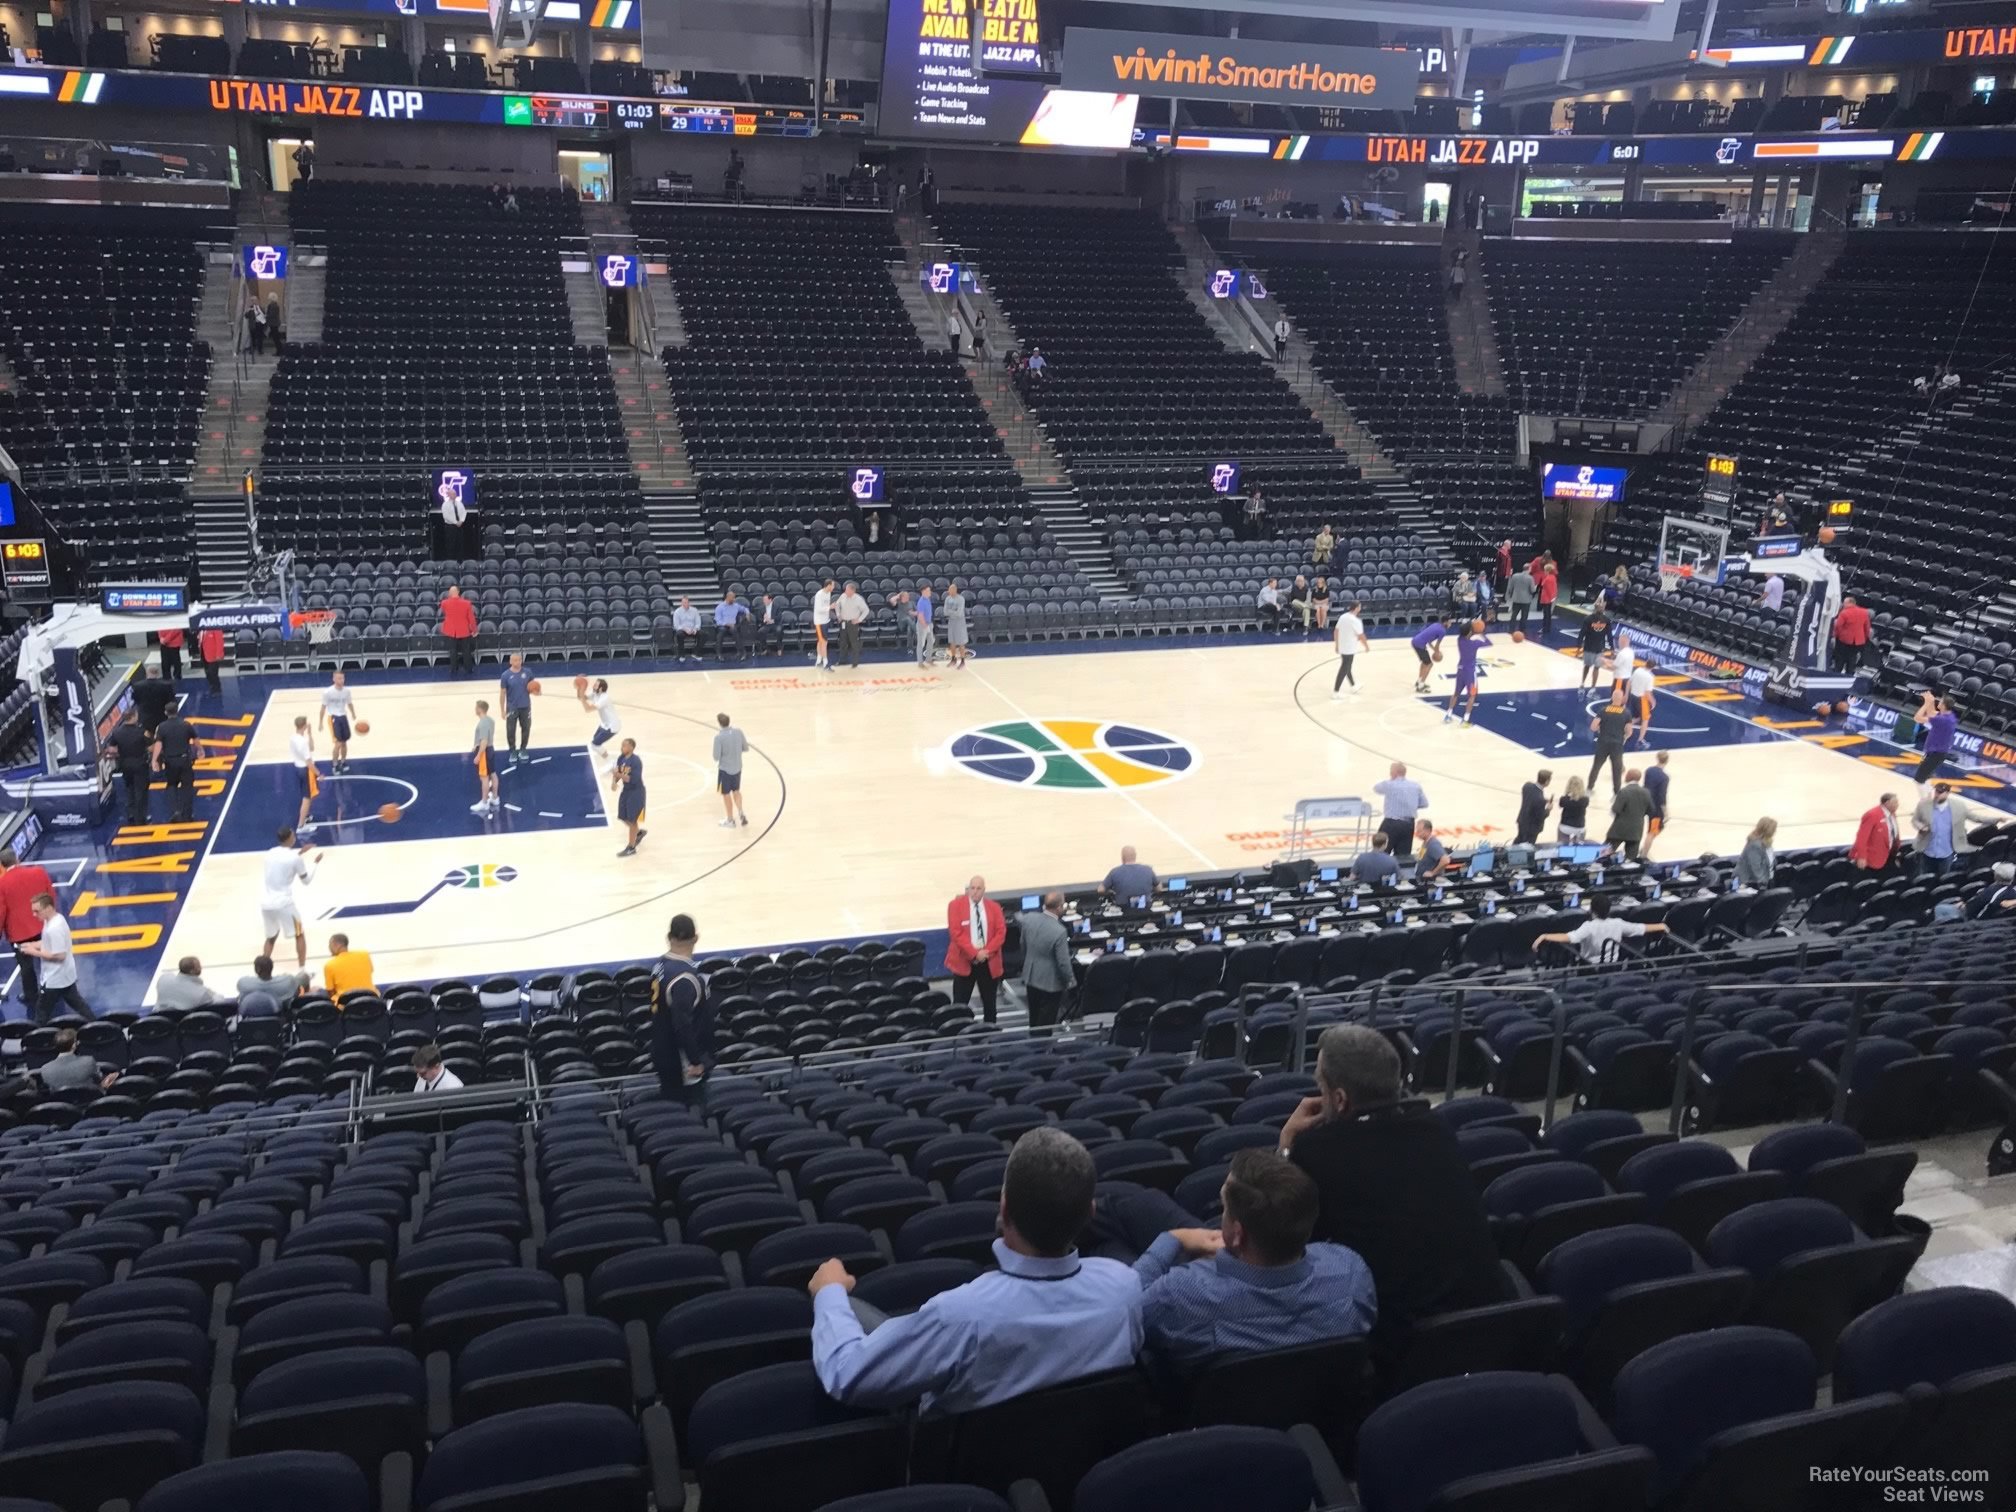 section 8, row 20 seat view  for basketball - vivint arena